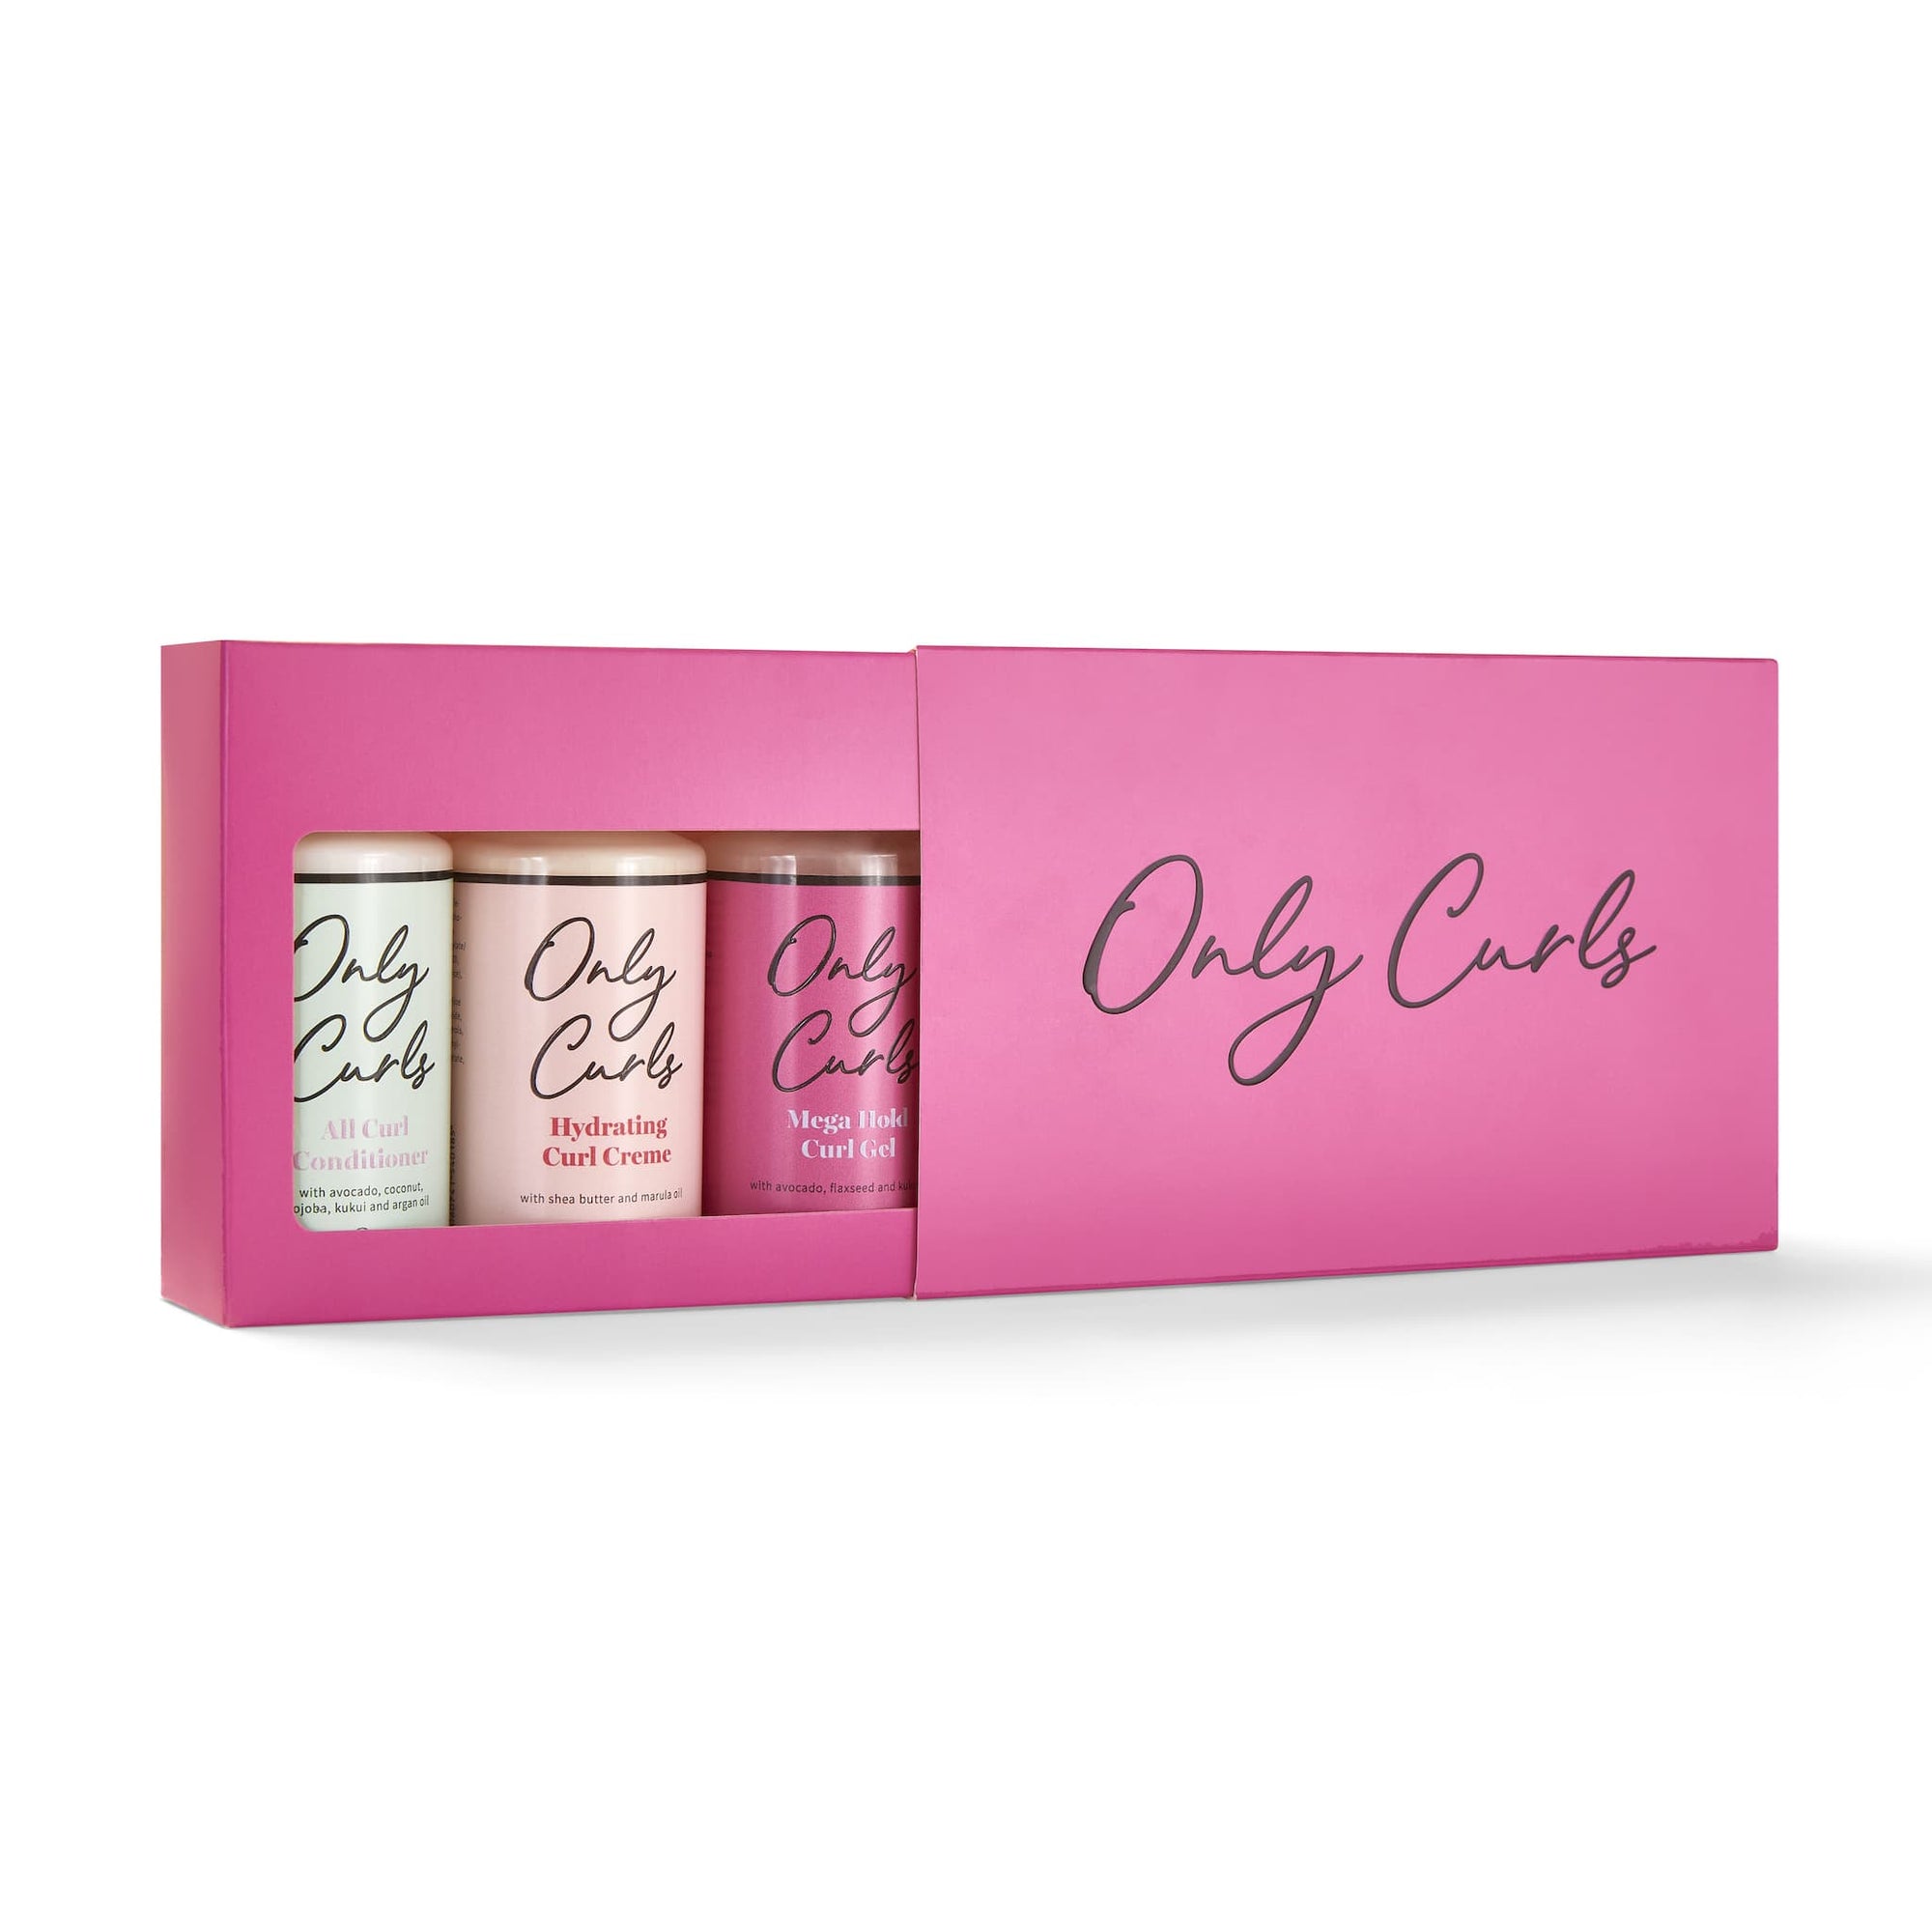 Mega Hold Mini Pack - Only Curls